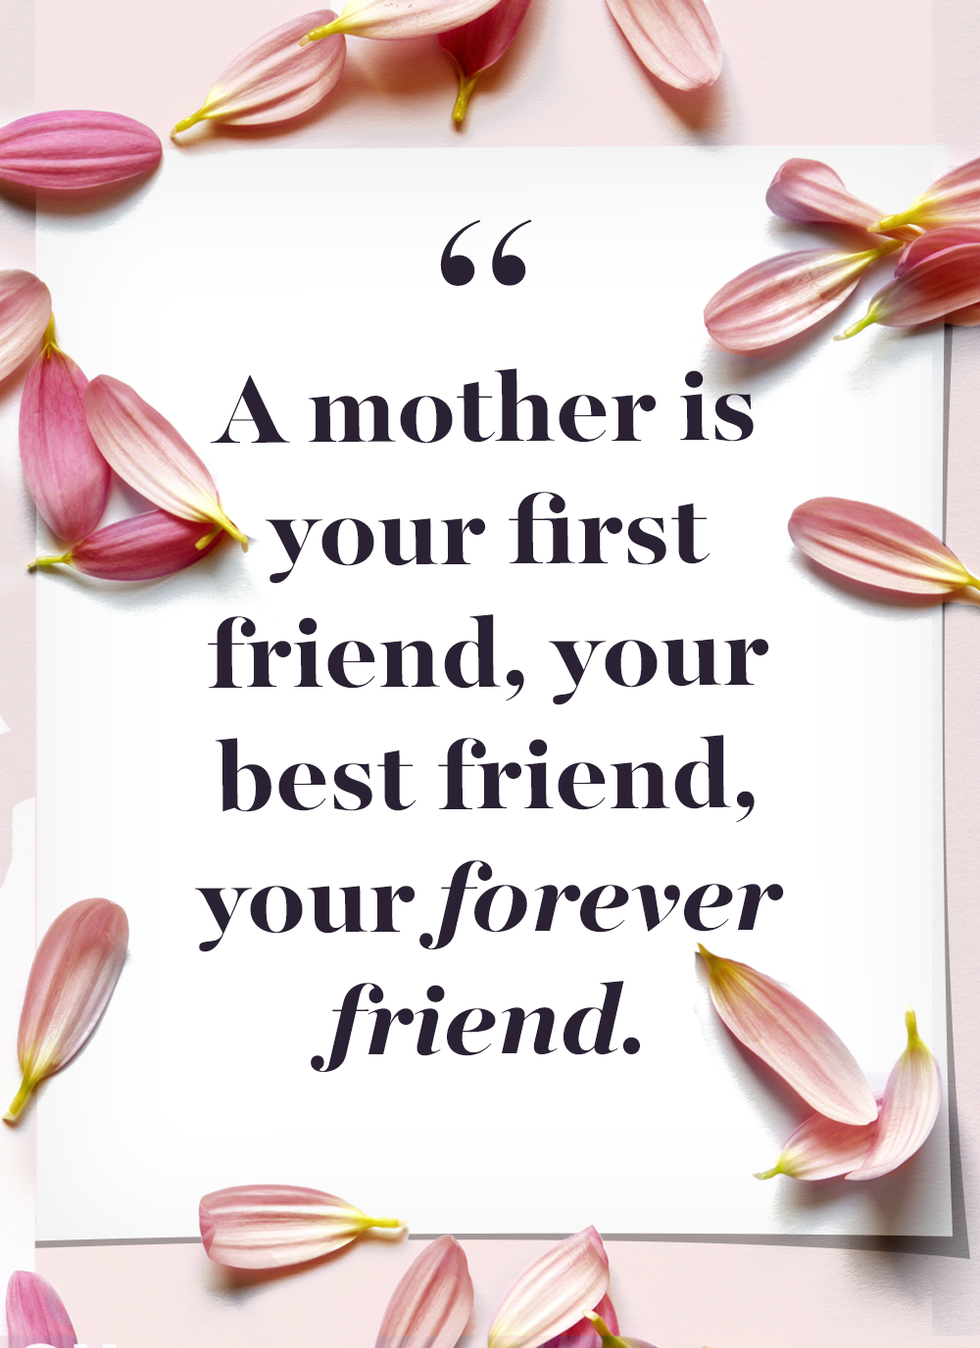 Happy Mothers Day Messages 51 Mother's Day Messages That Will Inspire